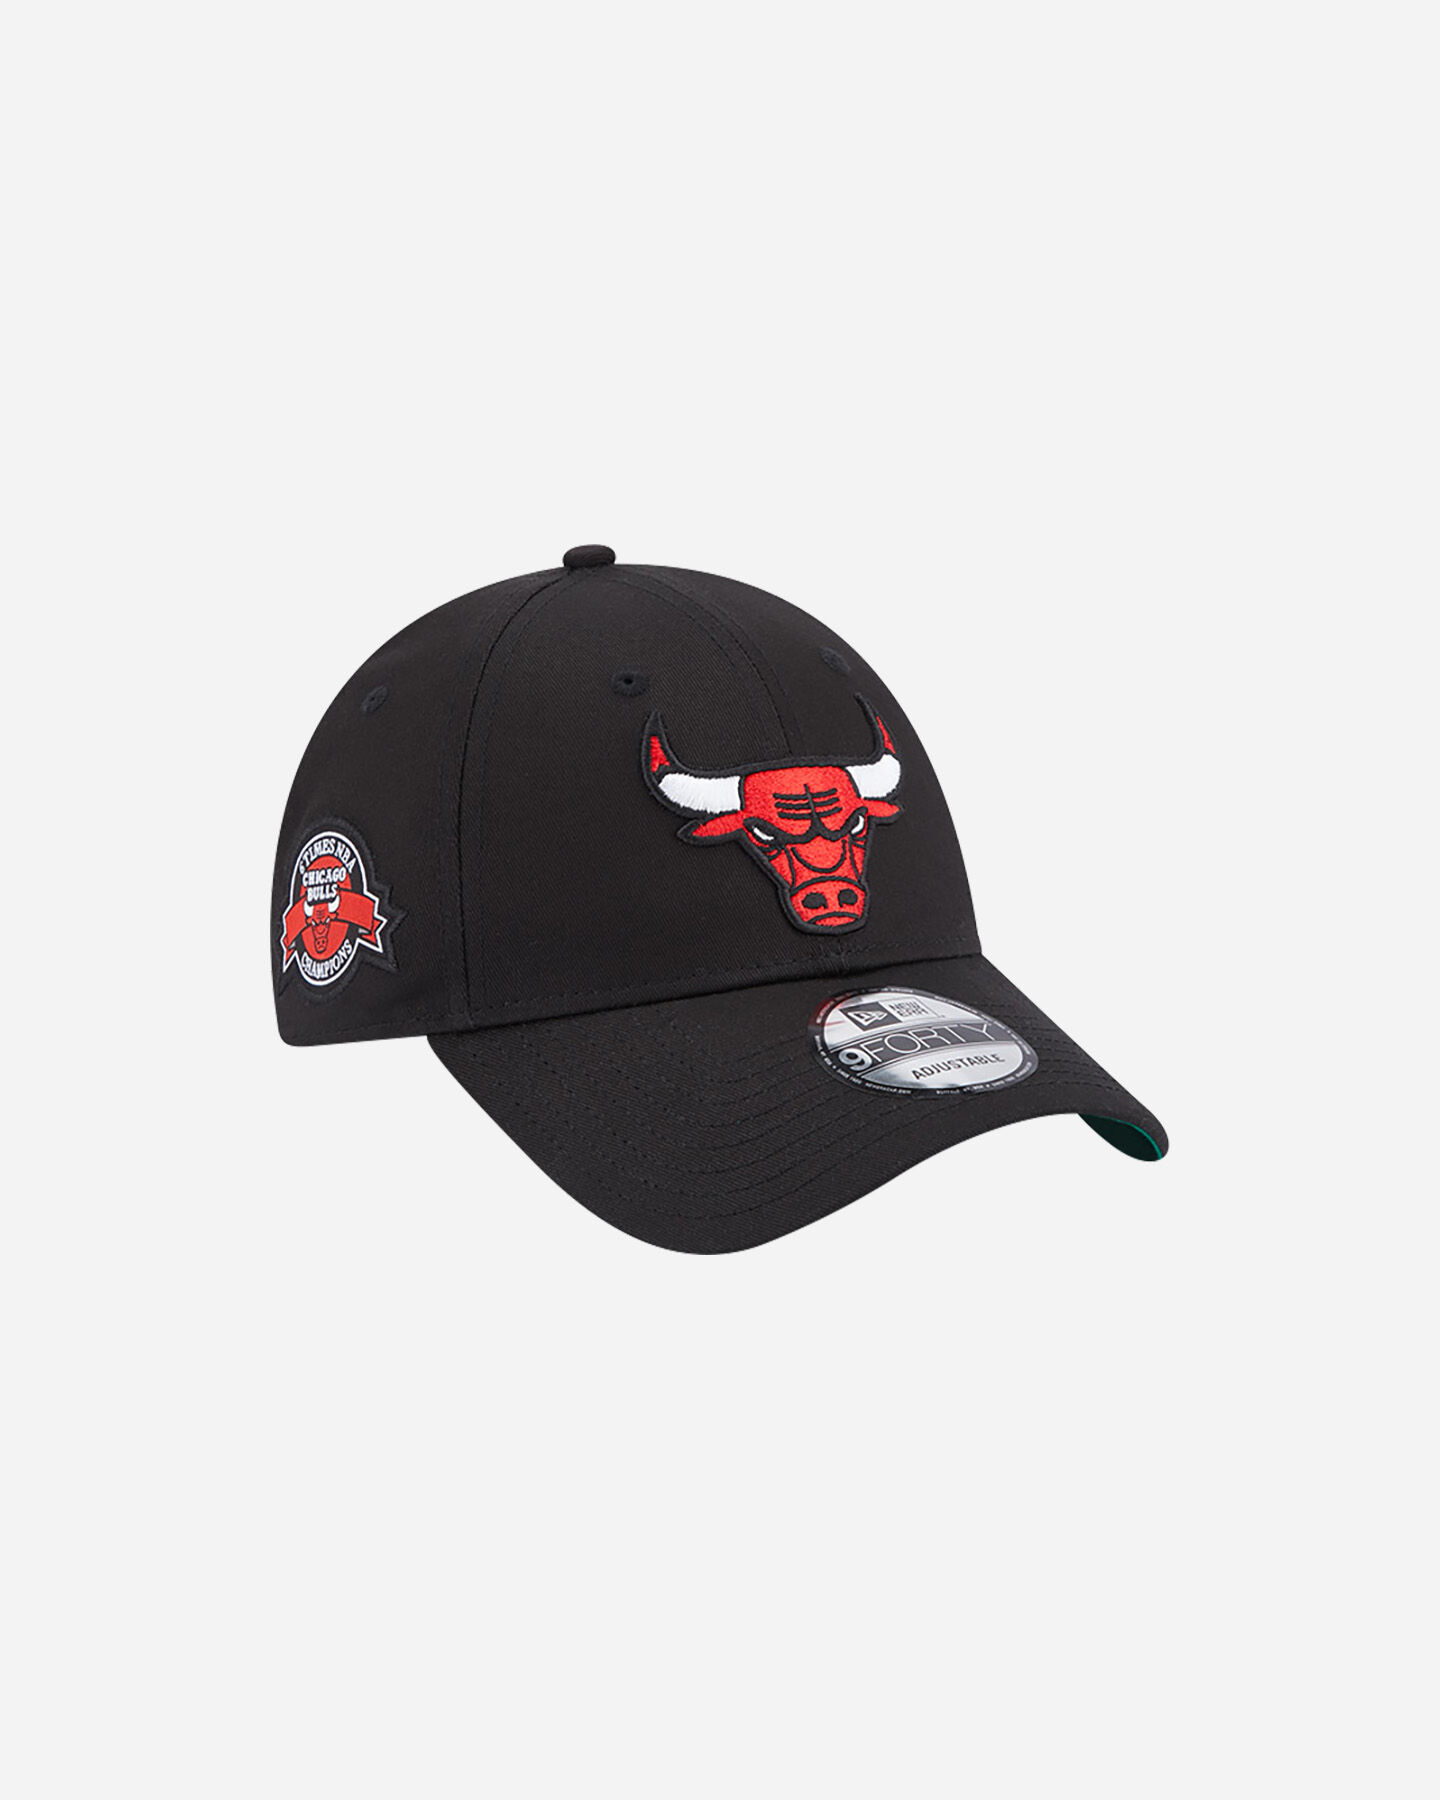  Cappellino NEW ERA 9FORTY TEAM SIDE PATCH CHICAGO BULLS  S5606225|001|OSFM scatto 2